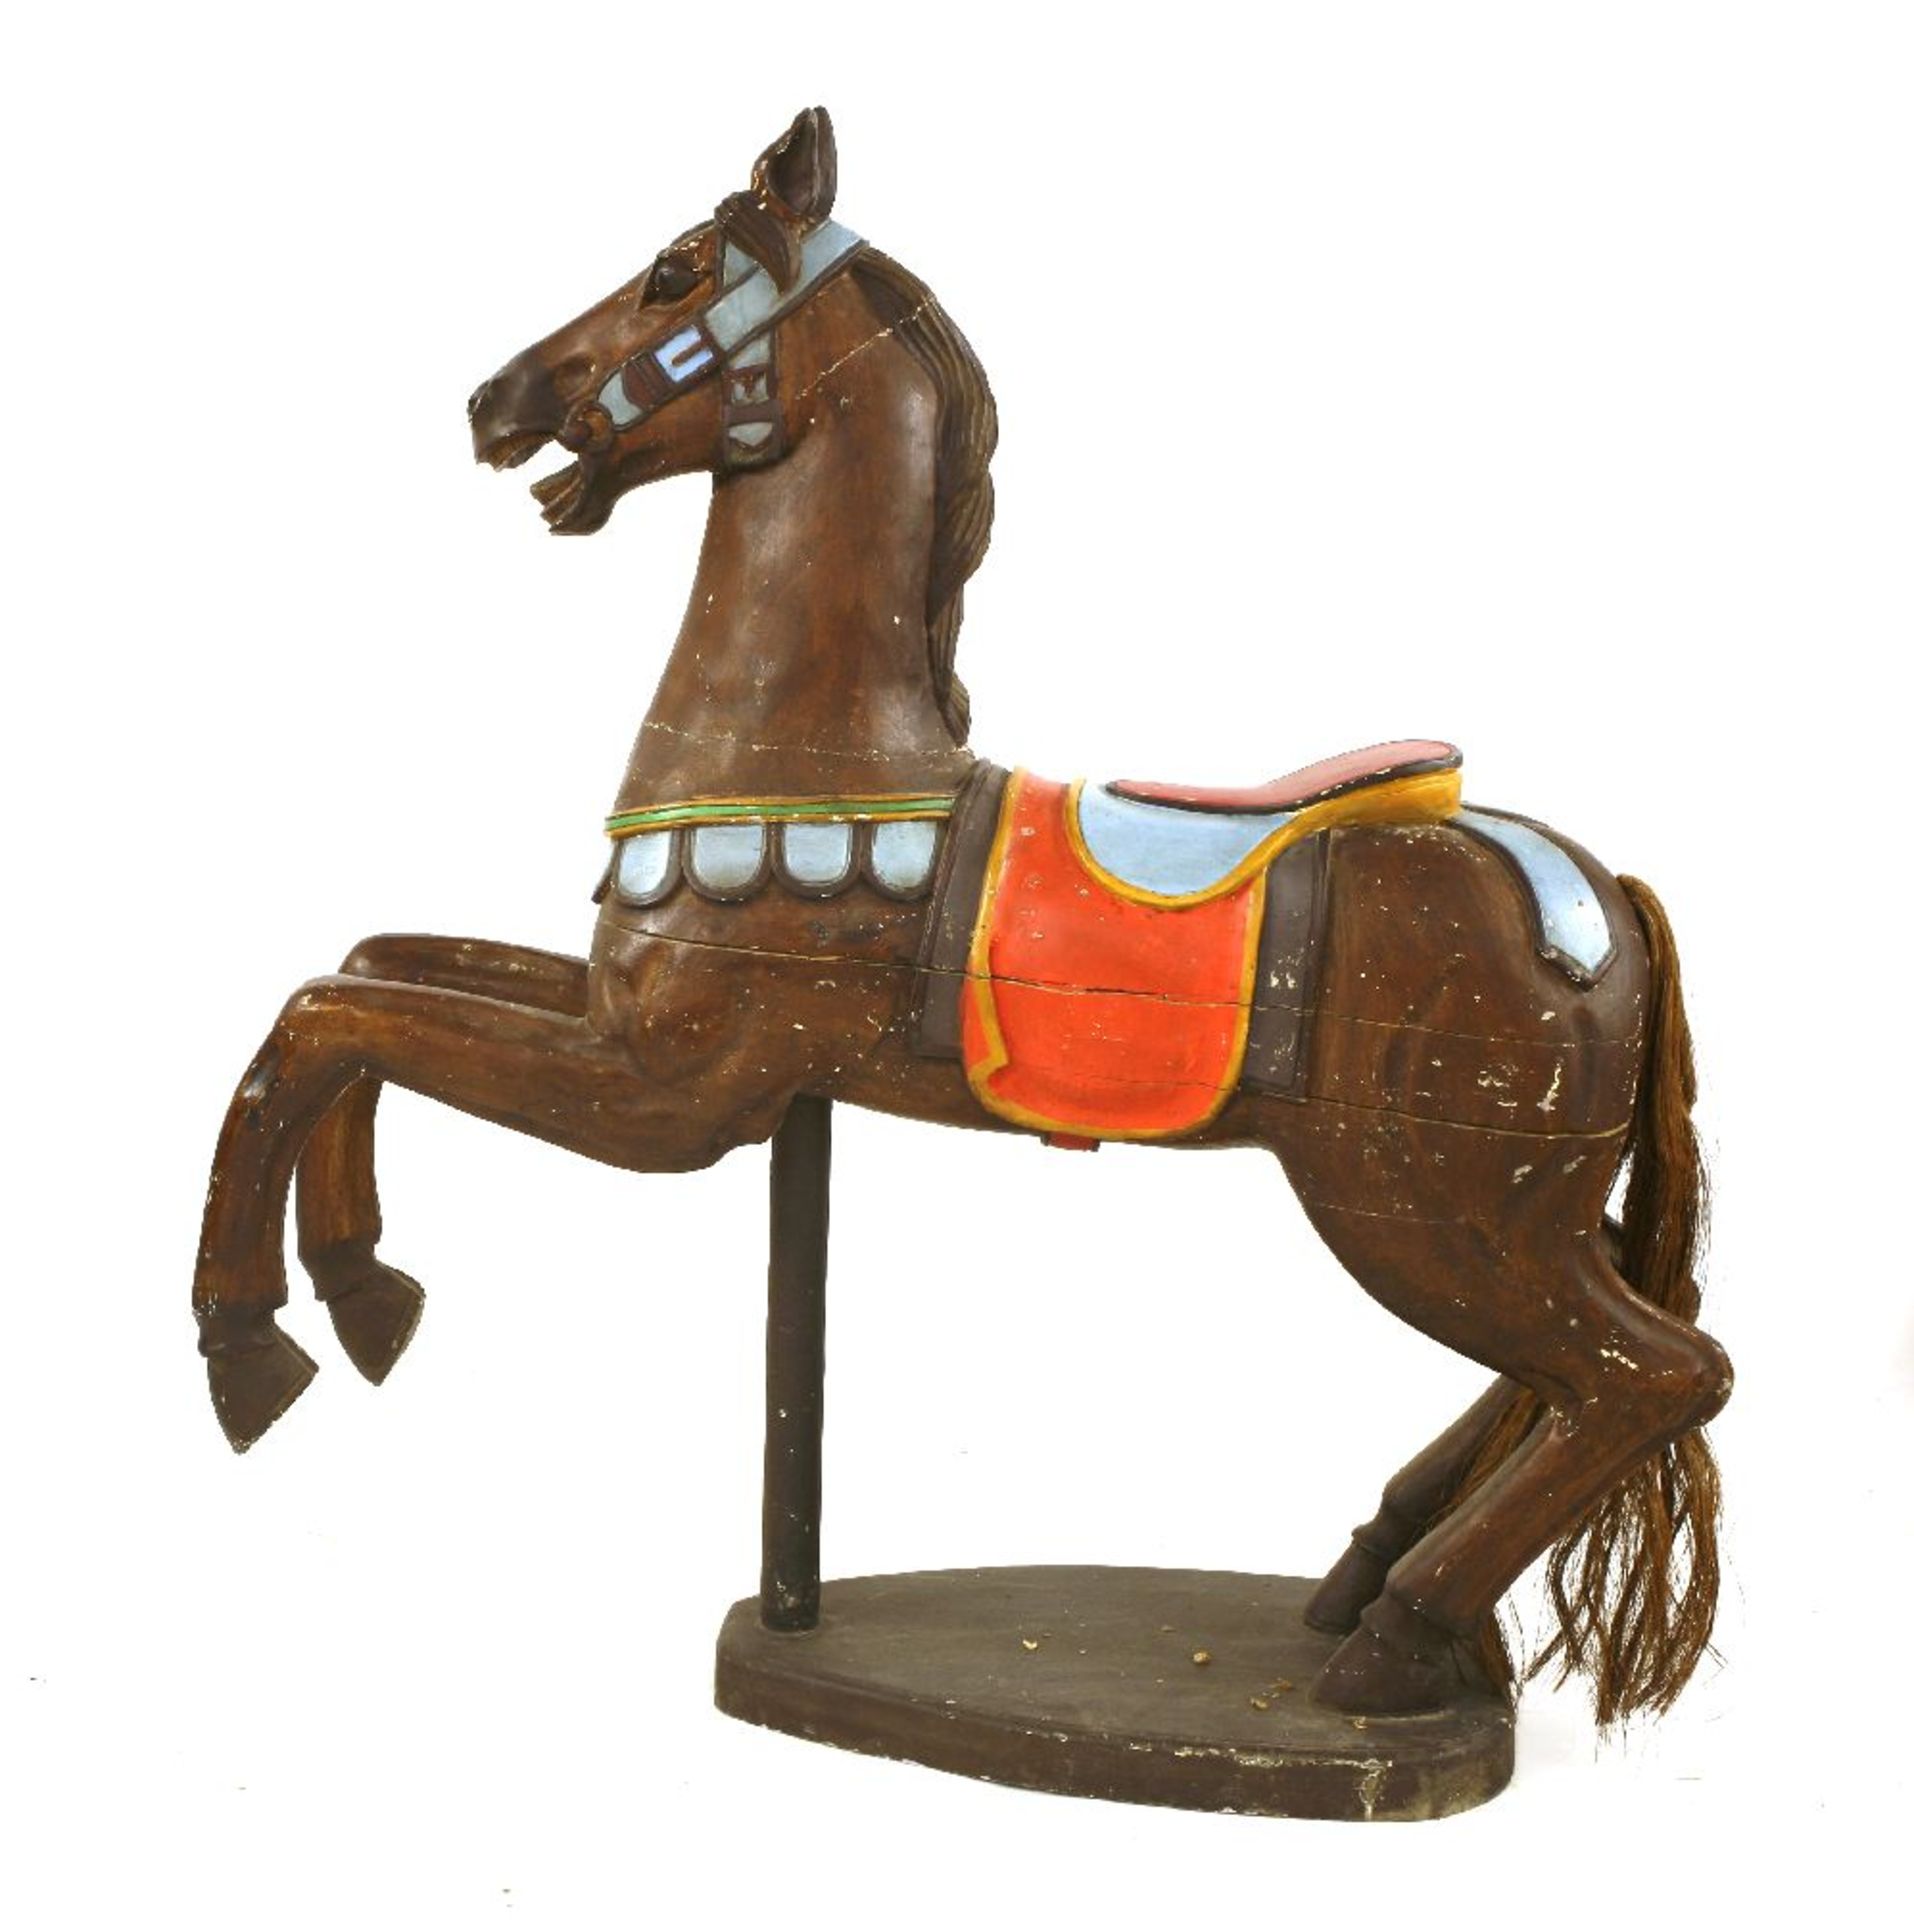 FAIRGROUND HORSE,early 20th century, a carved wooden and polychrome painted fairground carousel